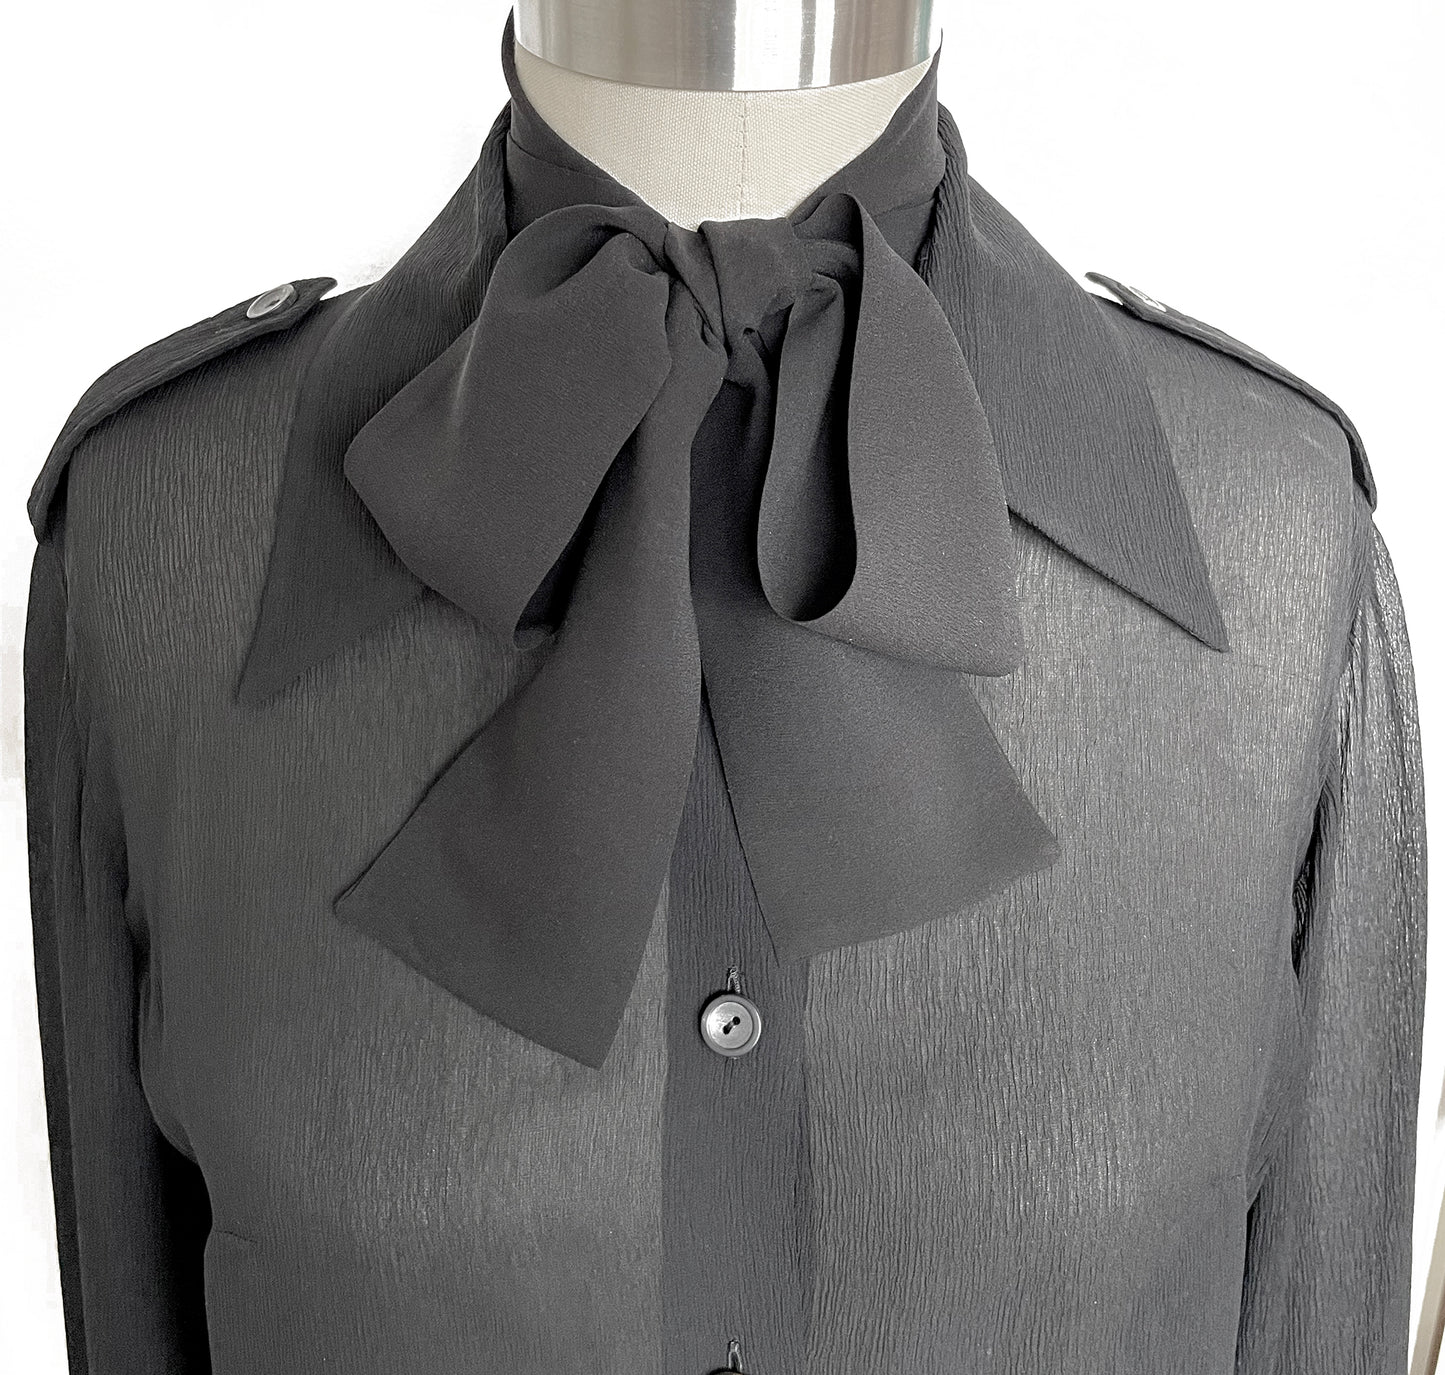 Black Silk Skinny Neck Scarf tied in a Bow shown on blouse